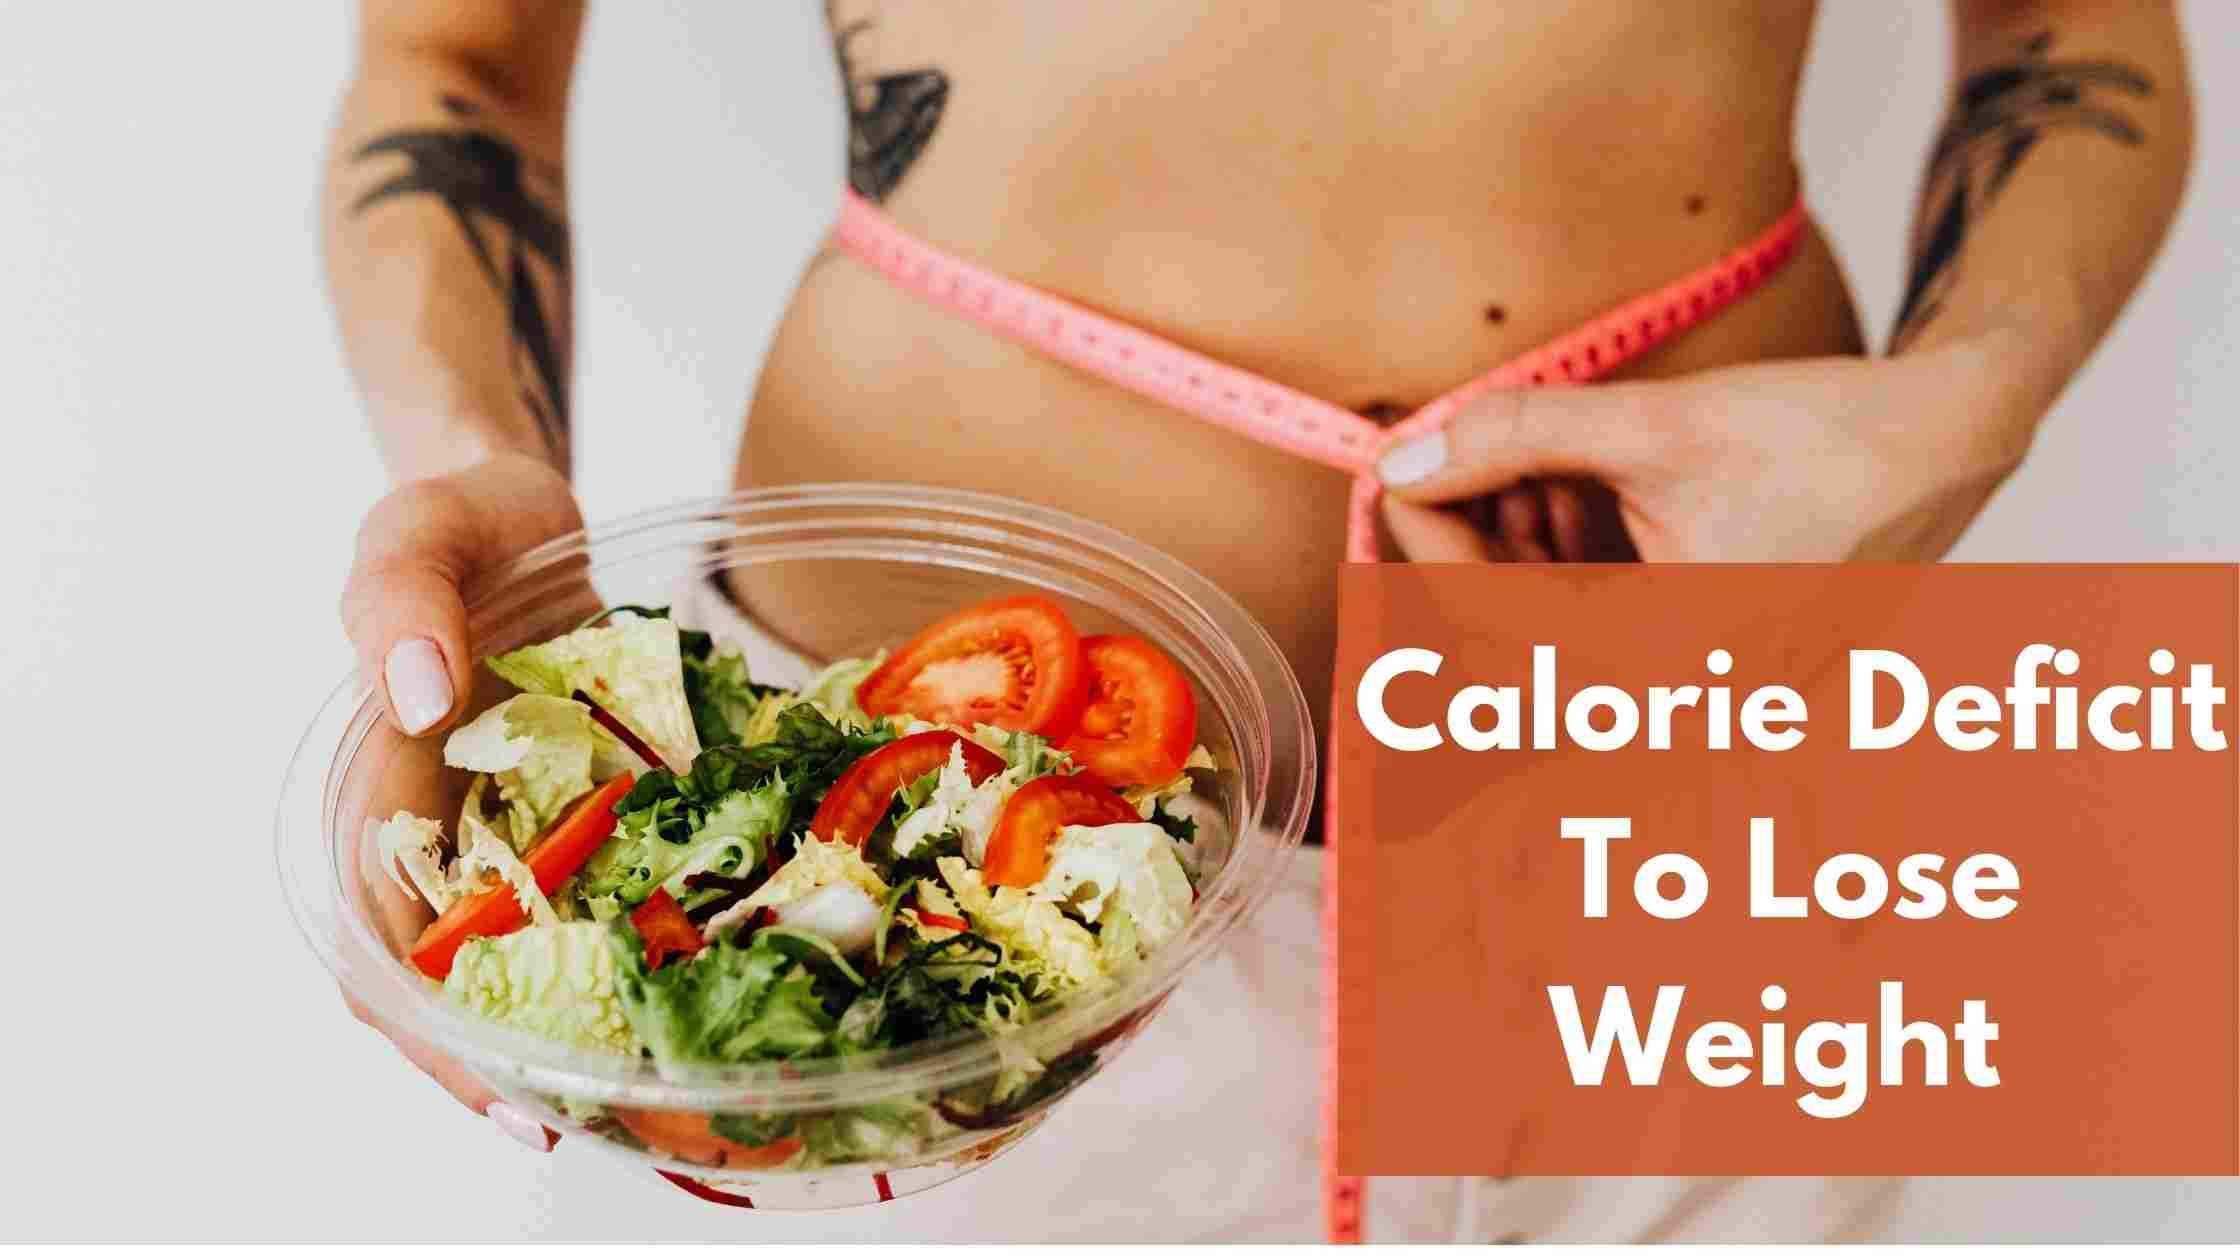 Calorie deficit to lose weight